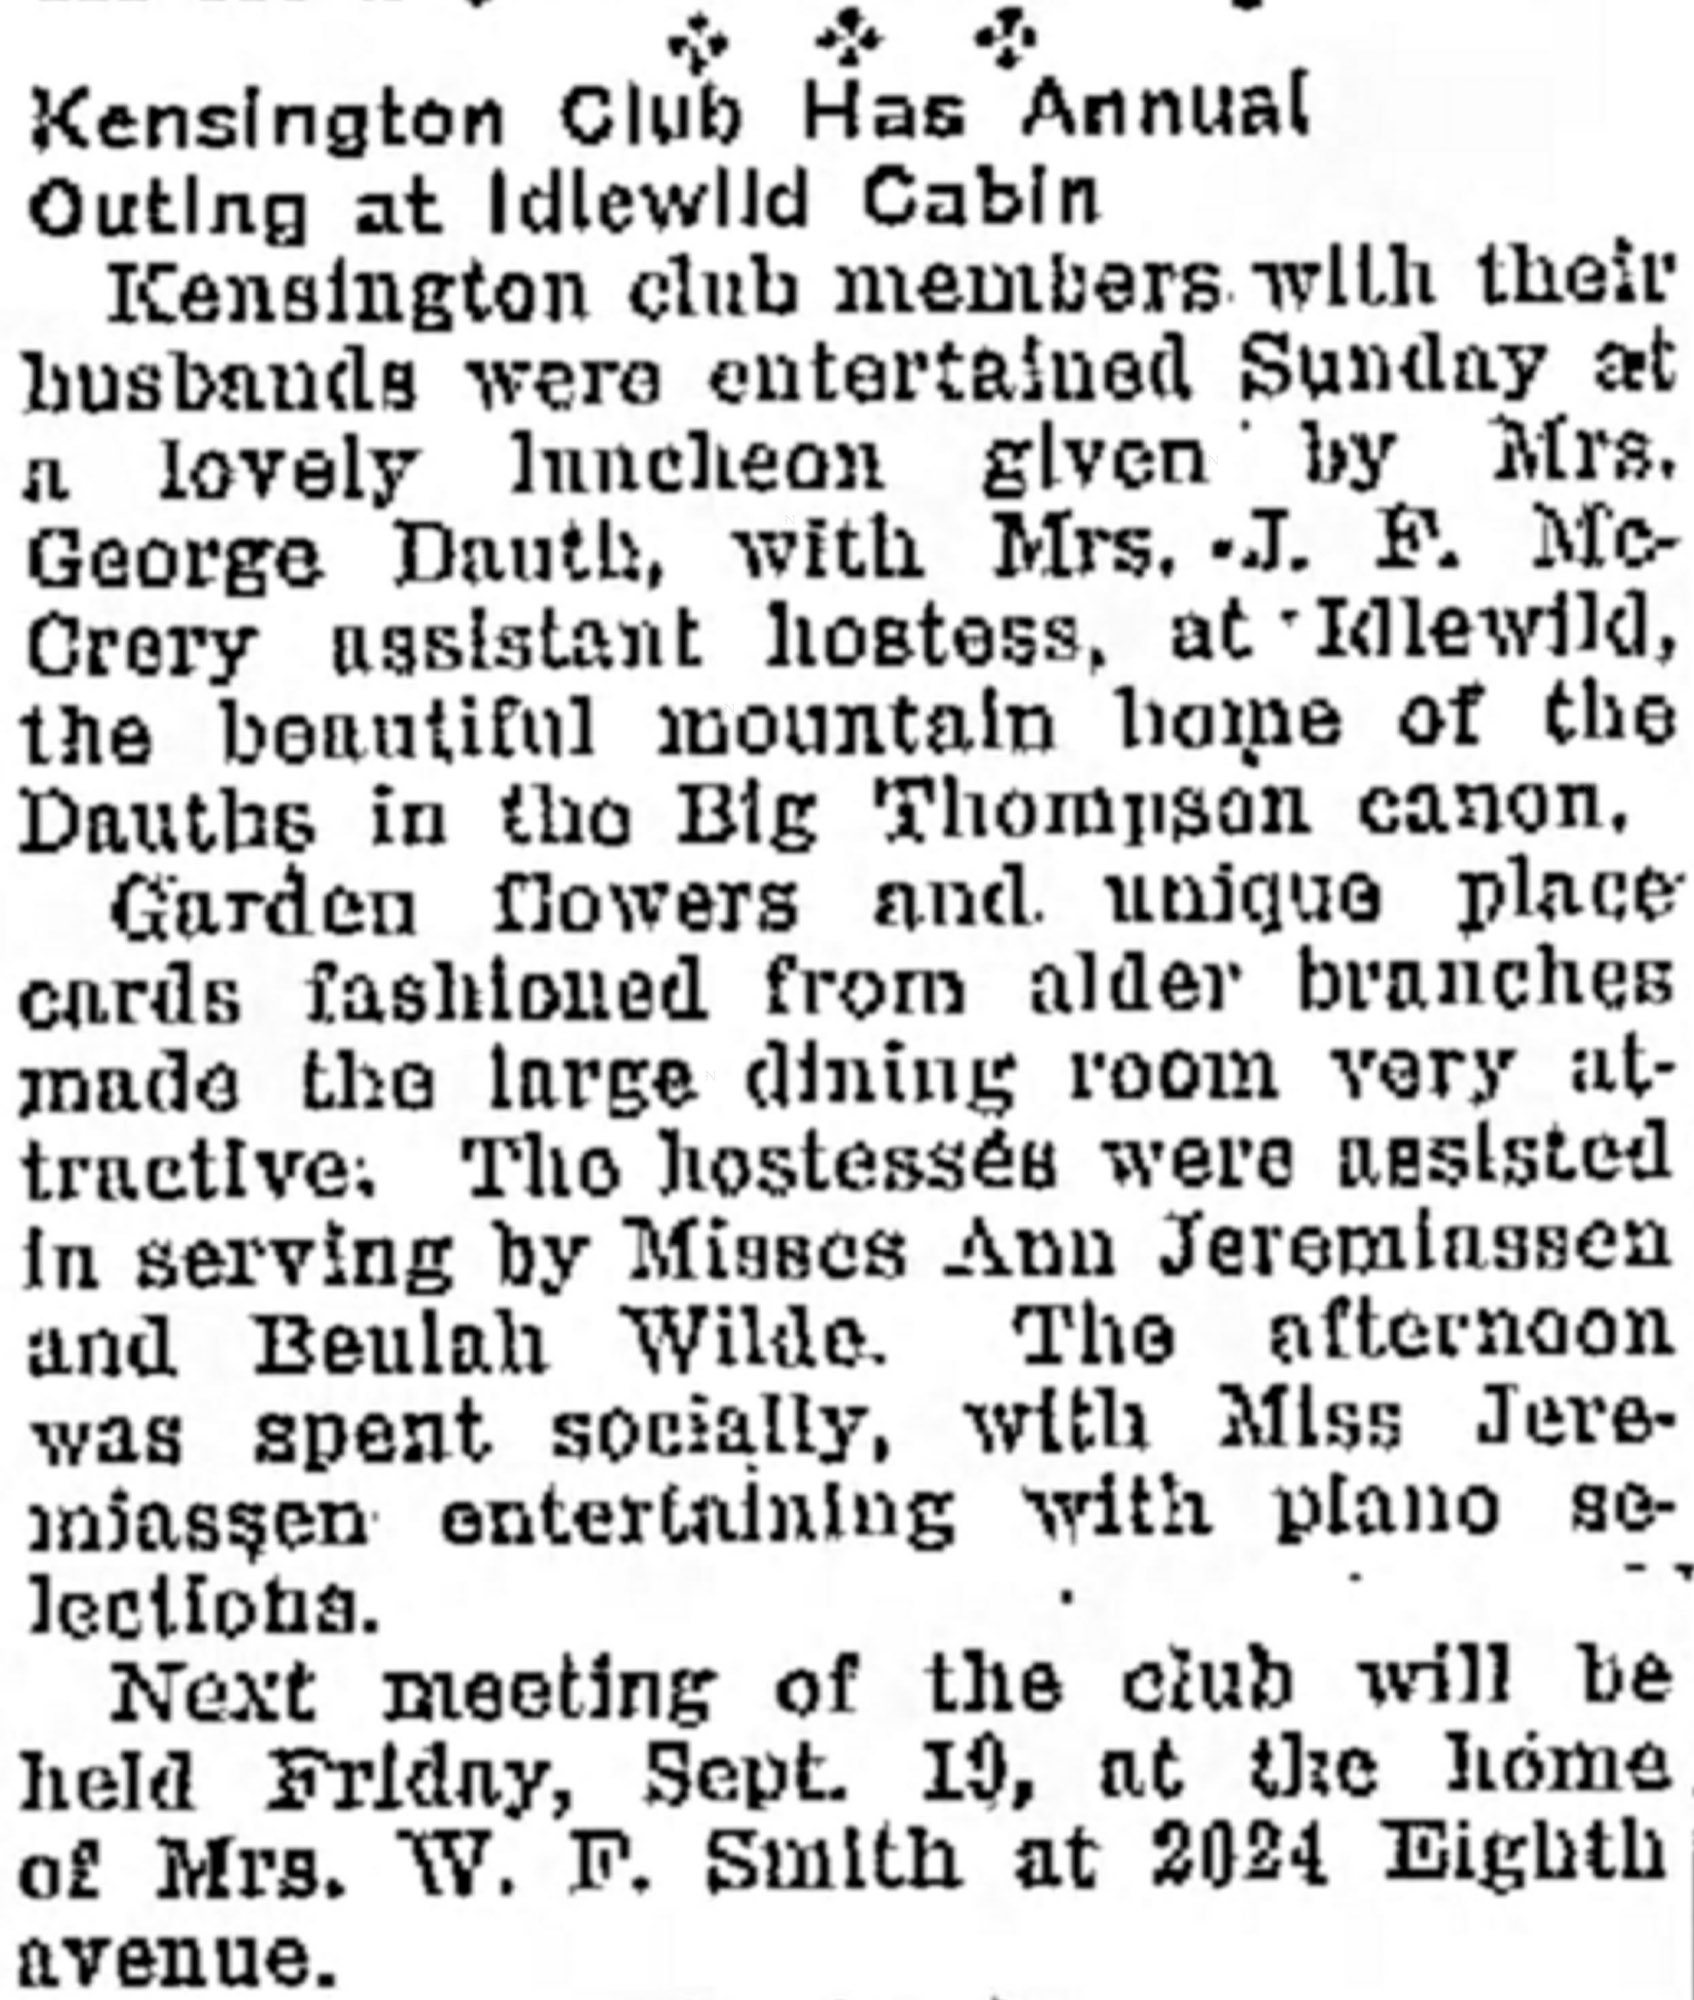 Dauth Family Archive - 1930-09-11 - Greeley Daily Tribune - Florence Dauth Hosts Kensington Club At Idlewild